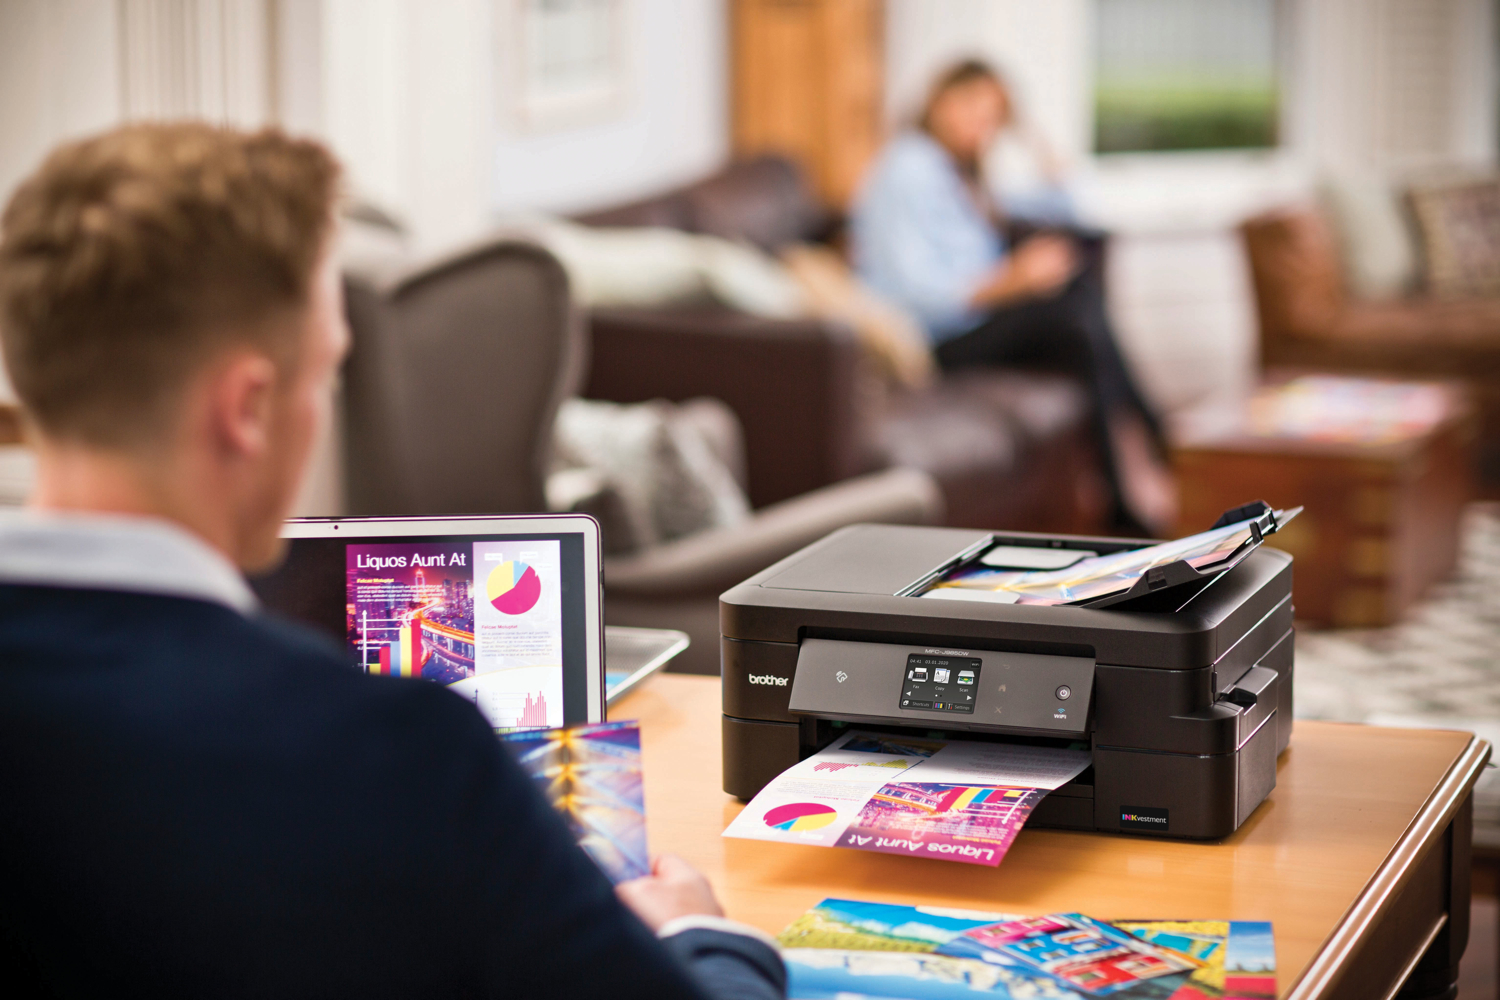 The Best Printers For College Students of (Summer) 2022: Buying Guide